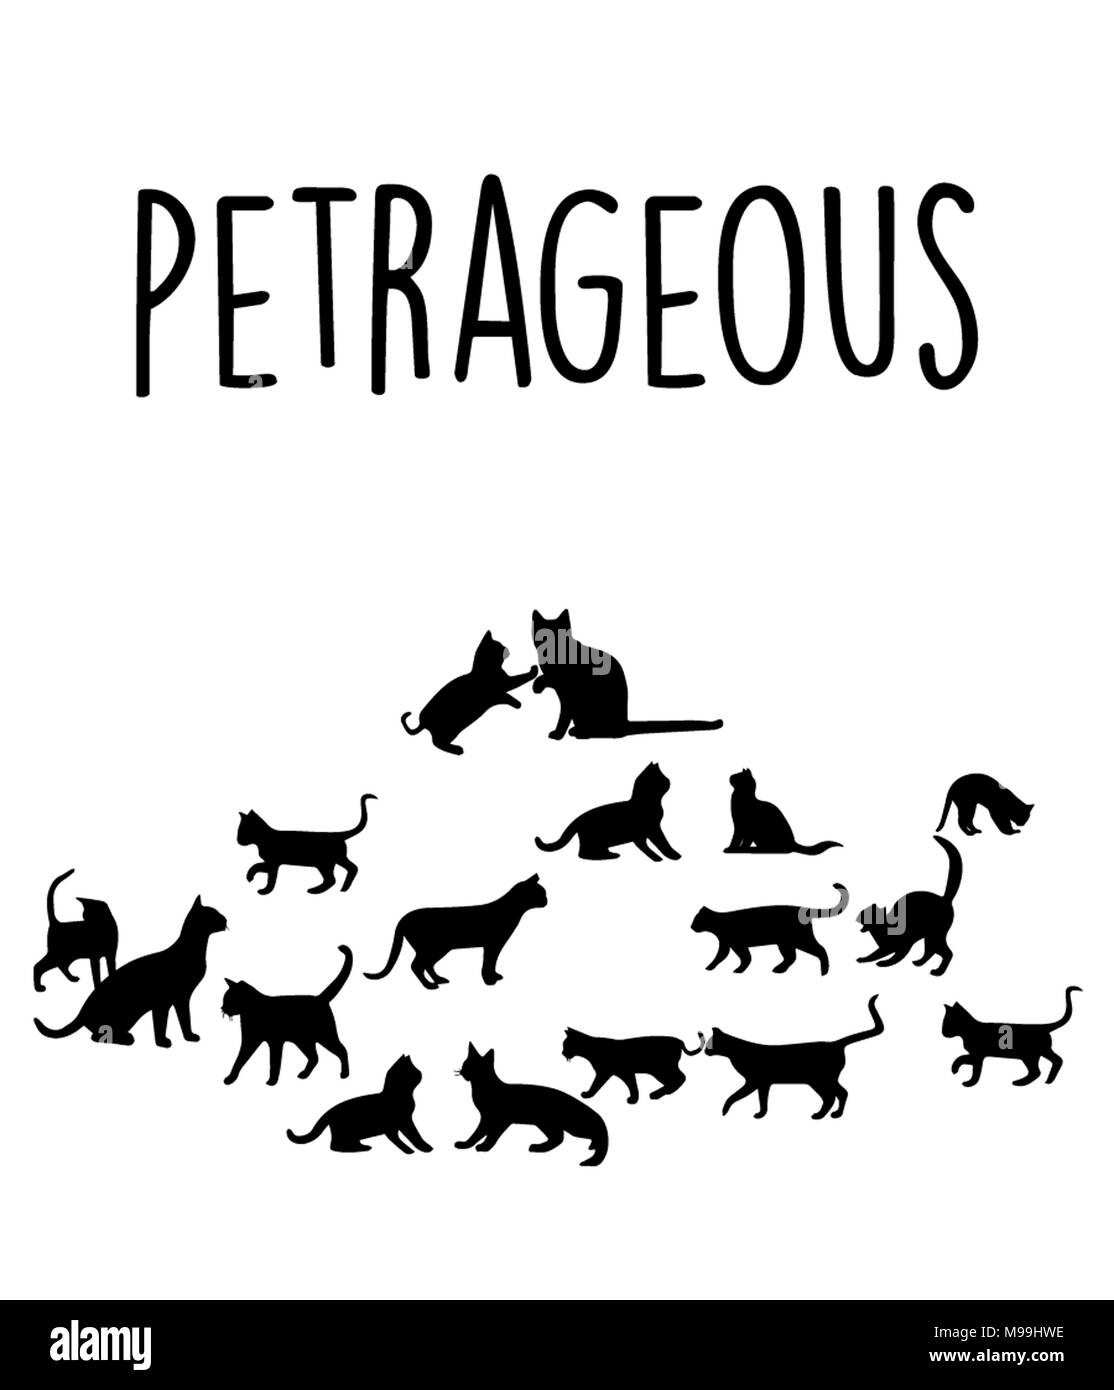 petrageous - with pictures of cats Stock Photo